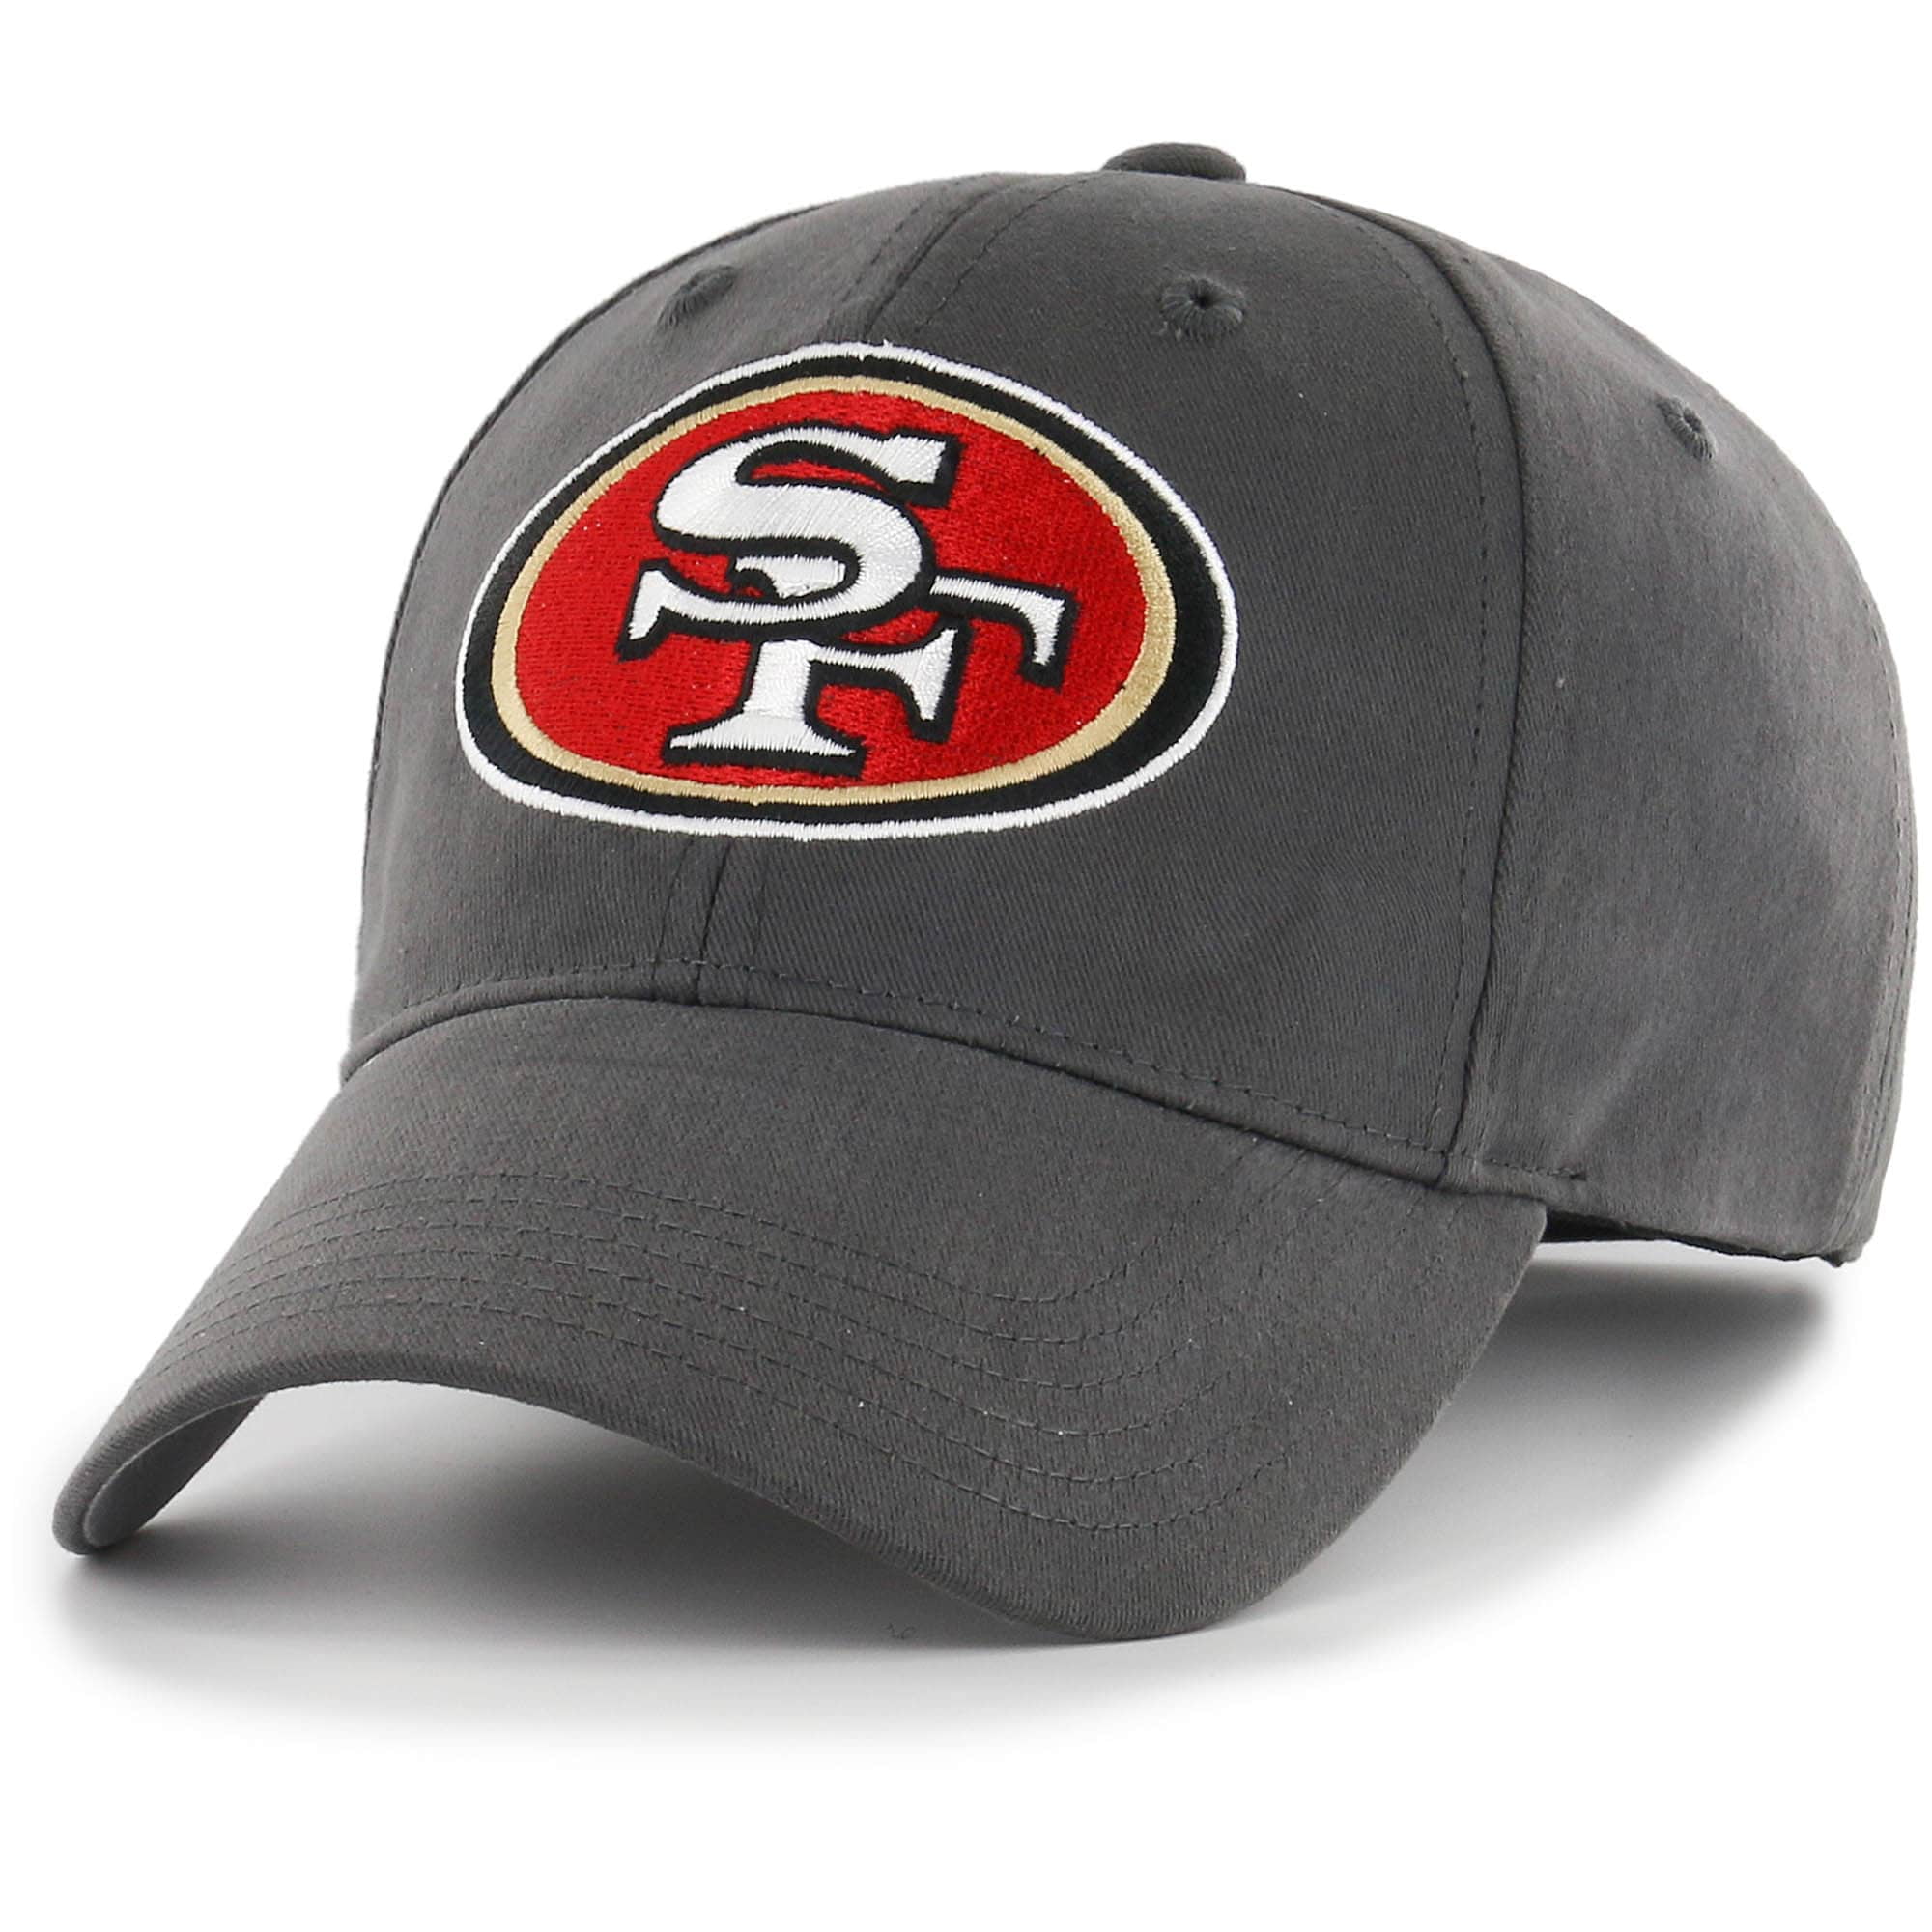 forty niners hats